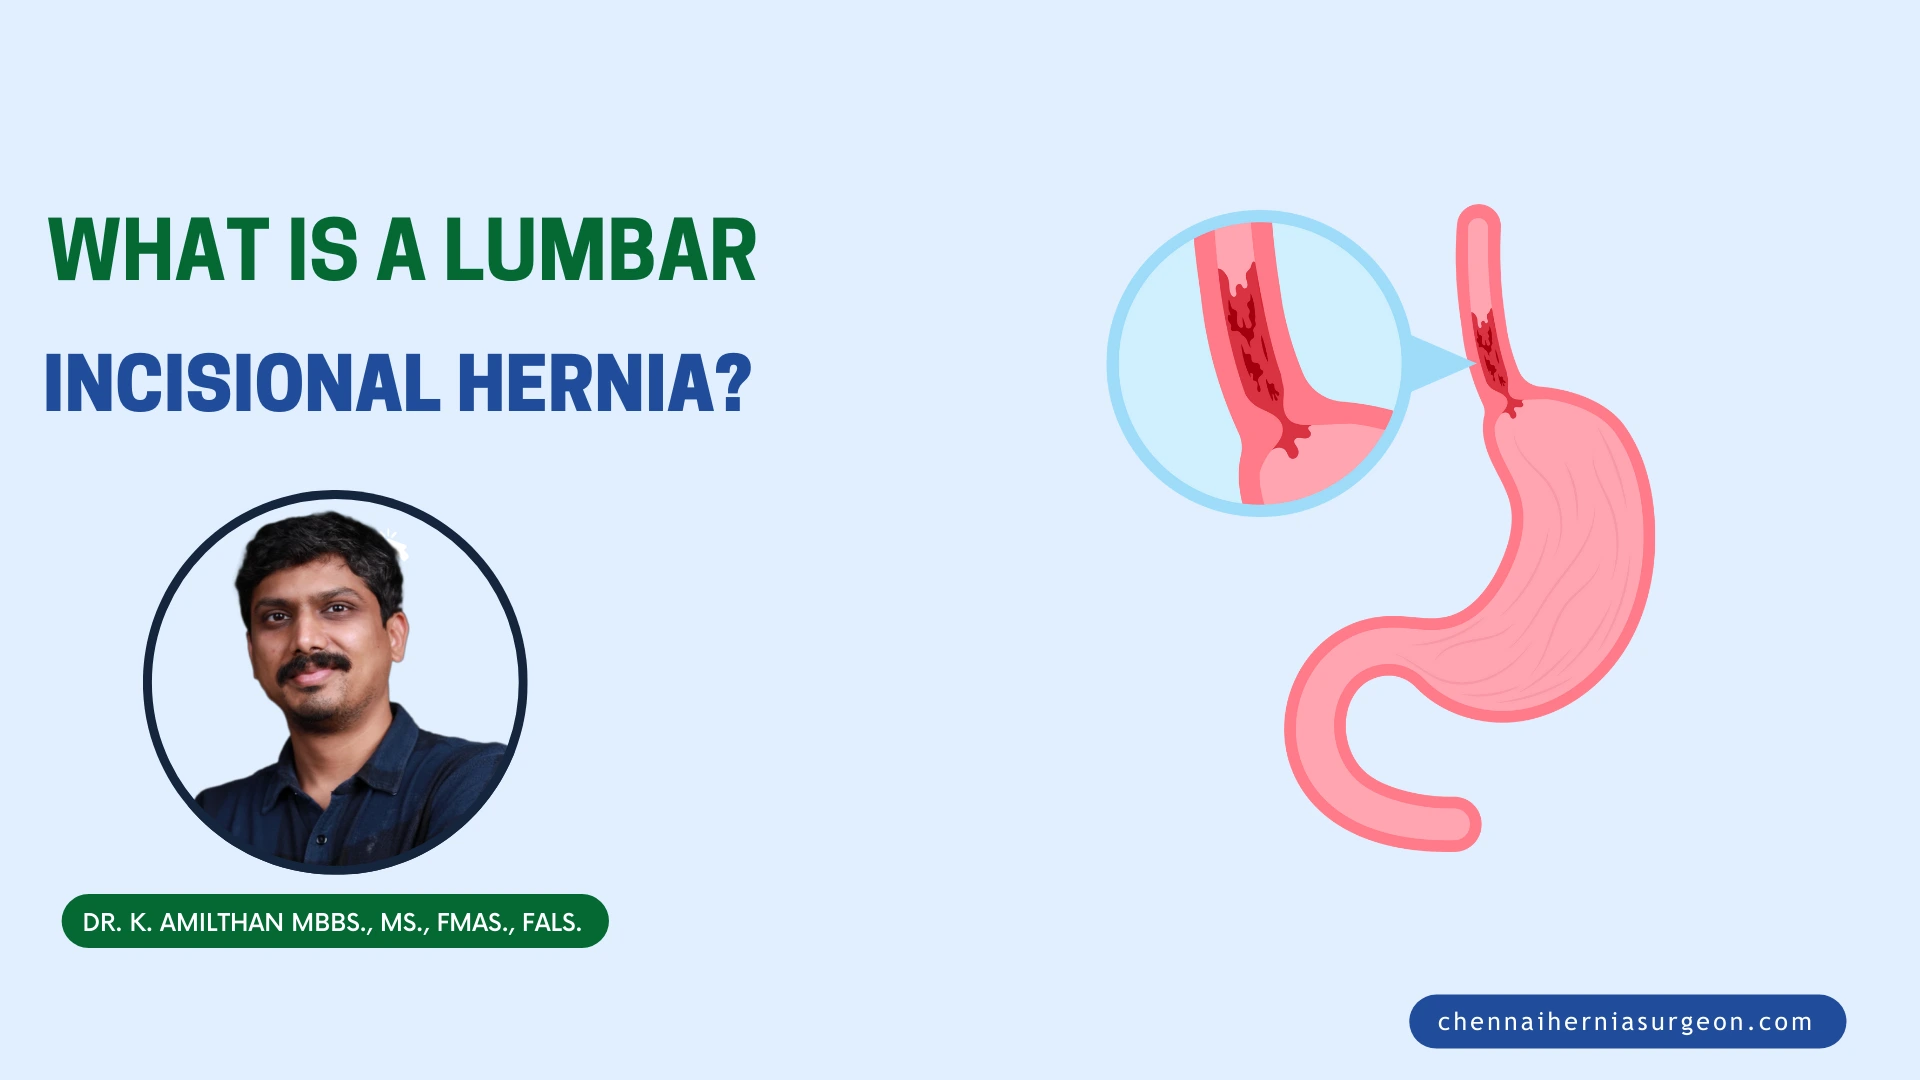 What is a lumbar incisional hernia